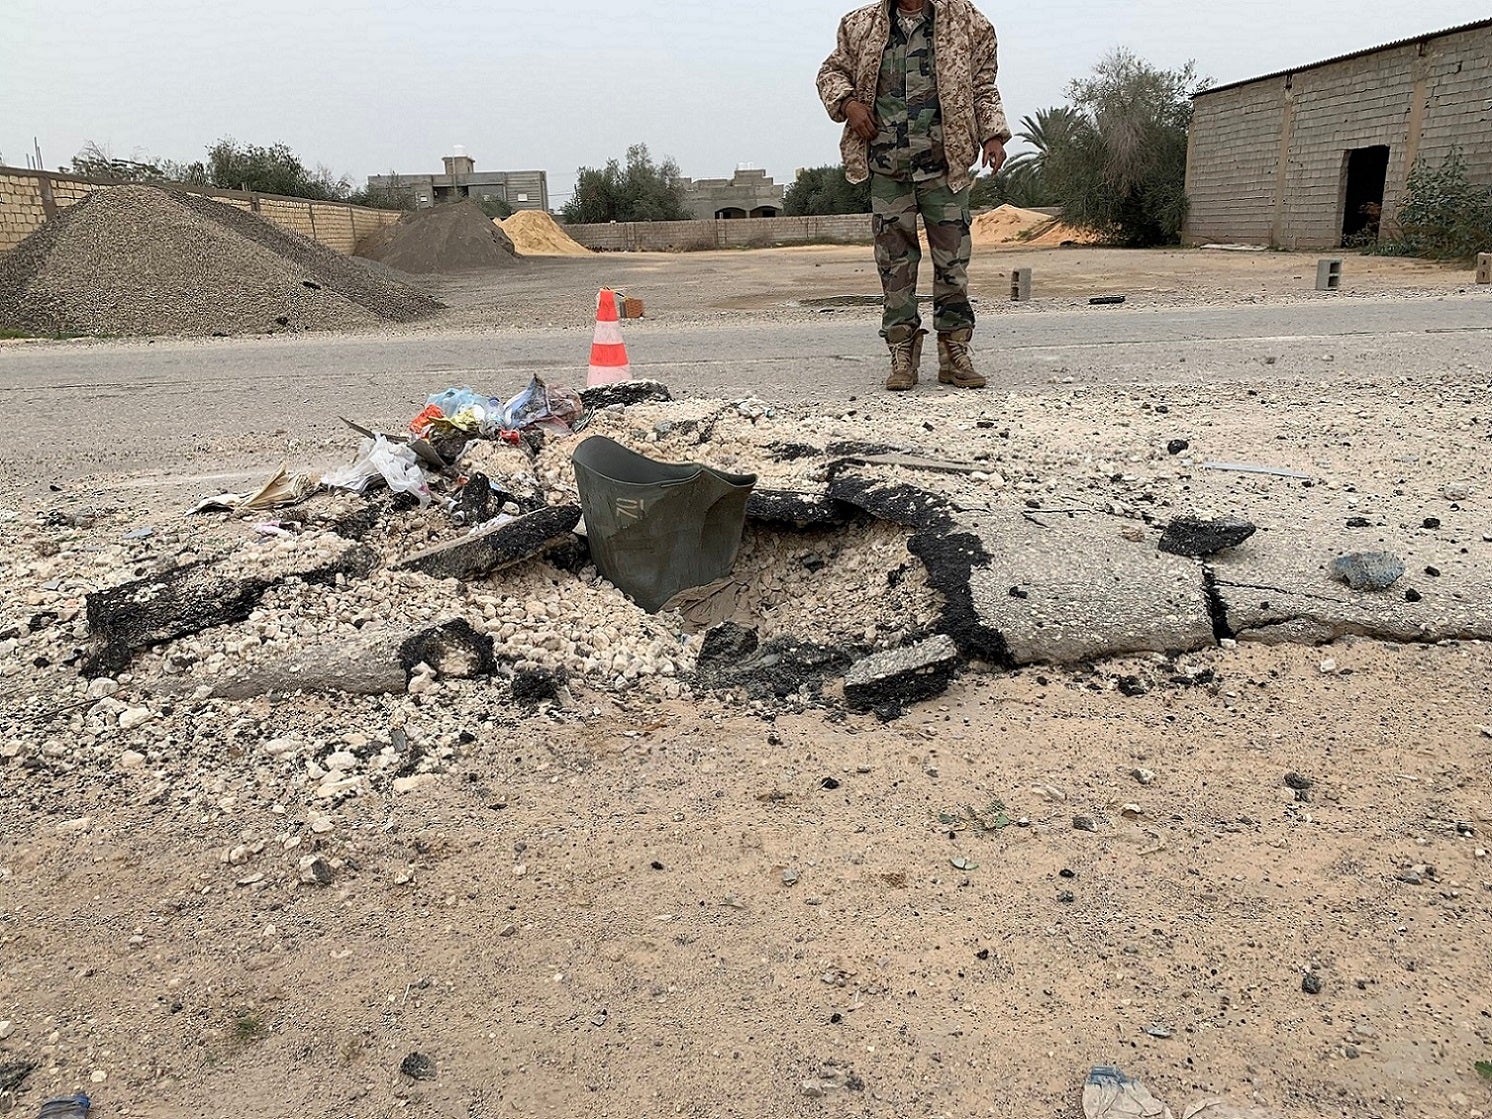 GNA checkpoint guard stands behind an expended cargo section of an RBK-250 PTAB-2.5M cluster bomb impacted into Alasfah Road near Tripoli International Airport following an attack on or around December 2, 2019, Tripoli outskirts, Libya, December 18, 2019.